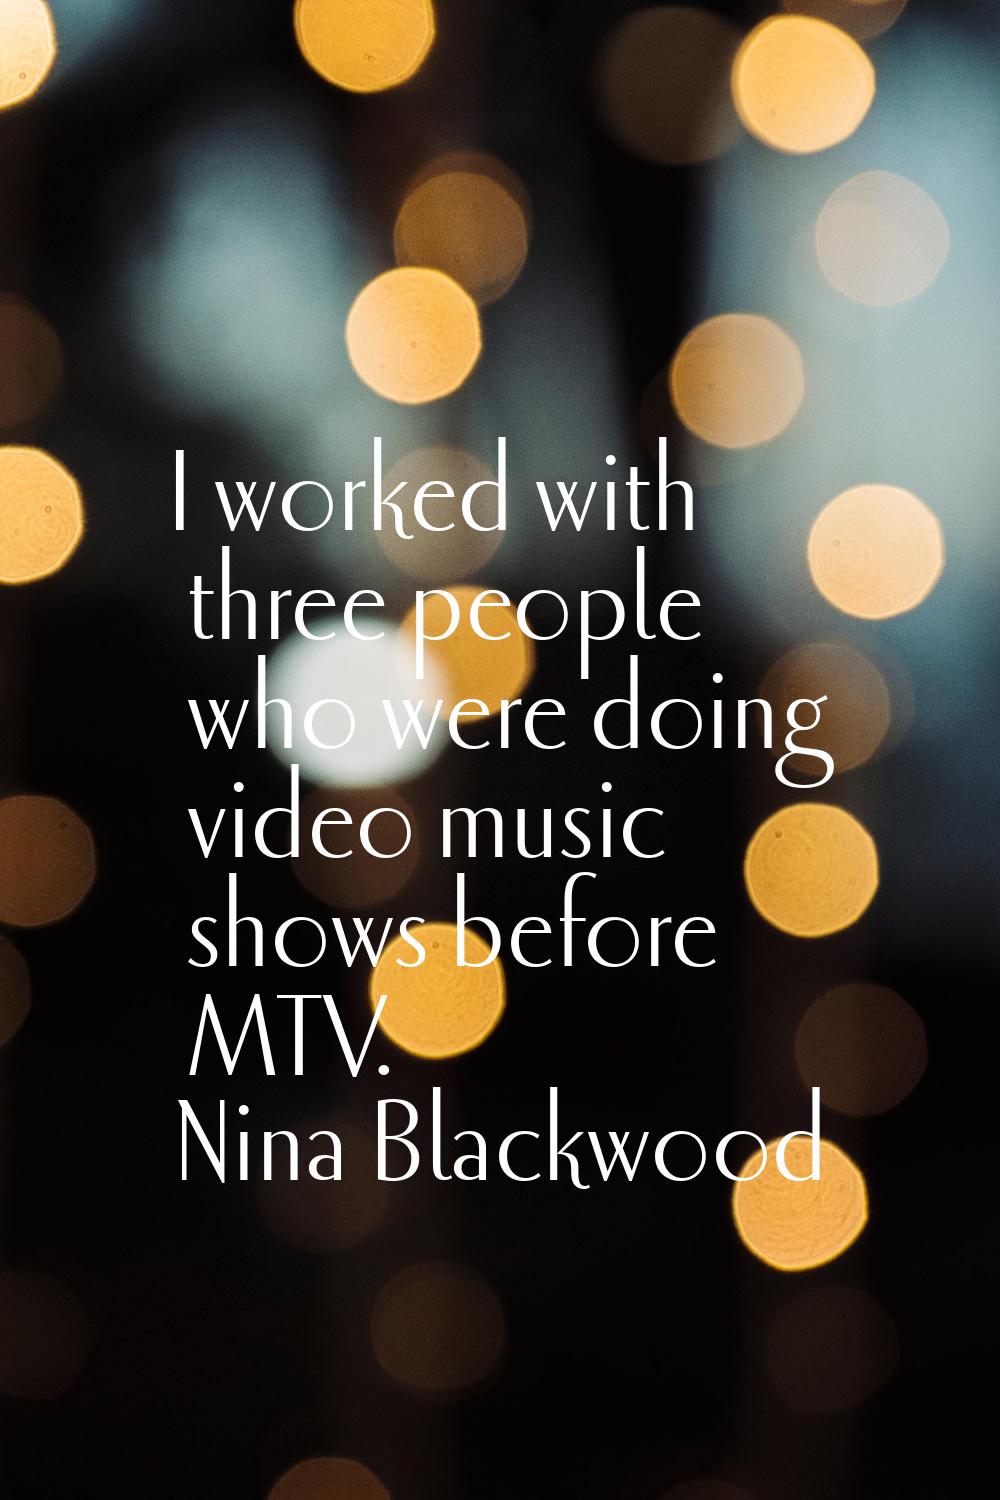 I worked with three people who were doing video music shows before MTV.